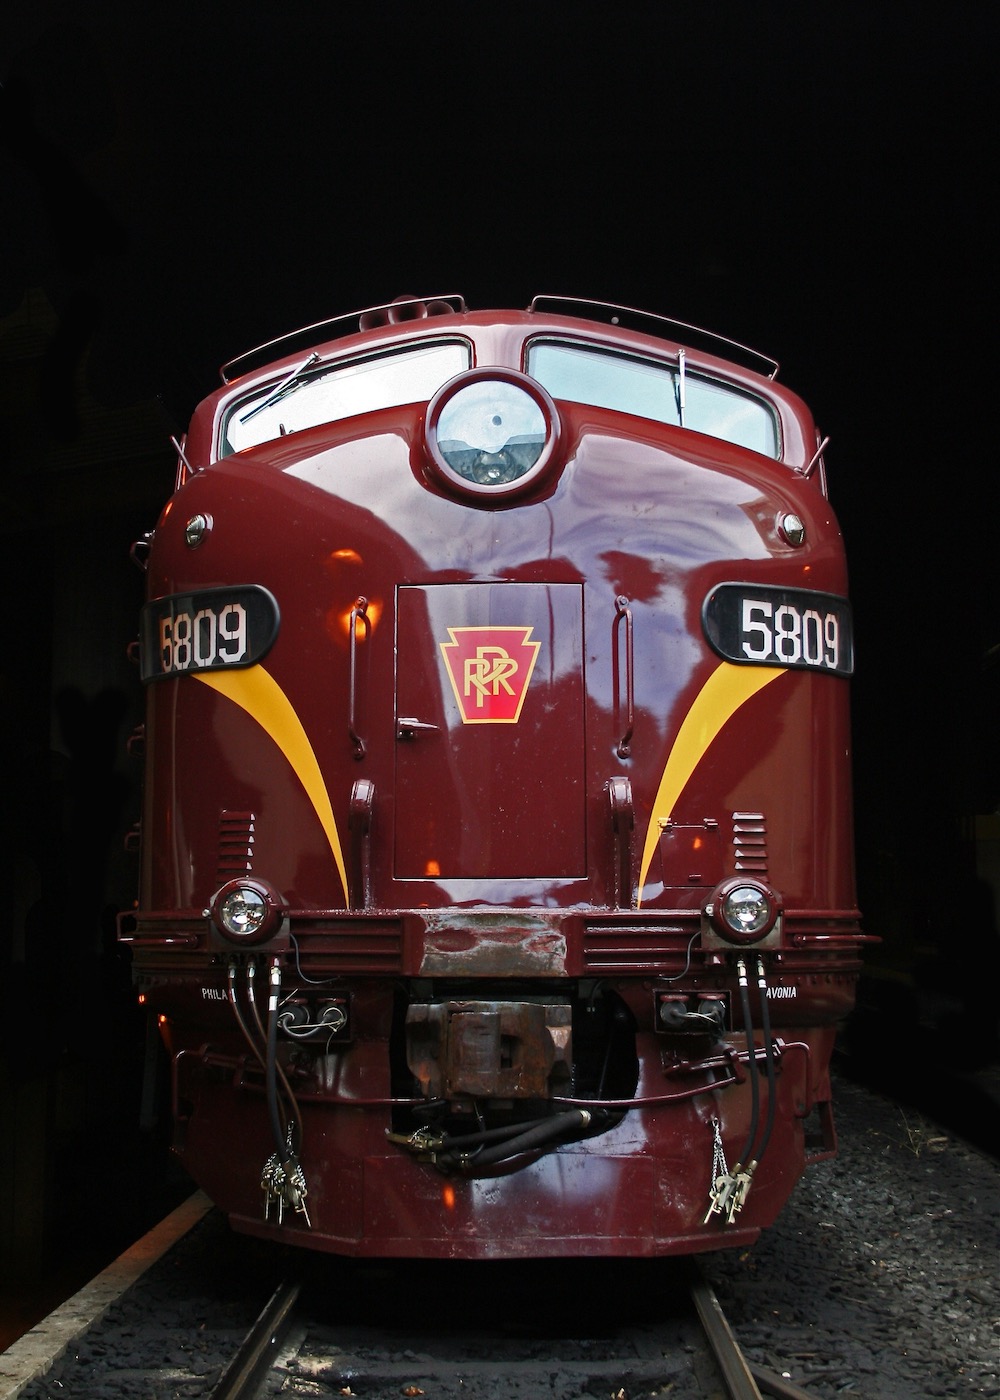 An image of the nose of a red-painted streamlined diesel with gold stripes